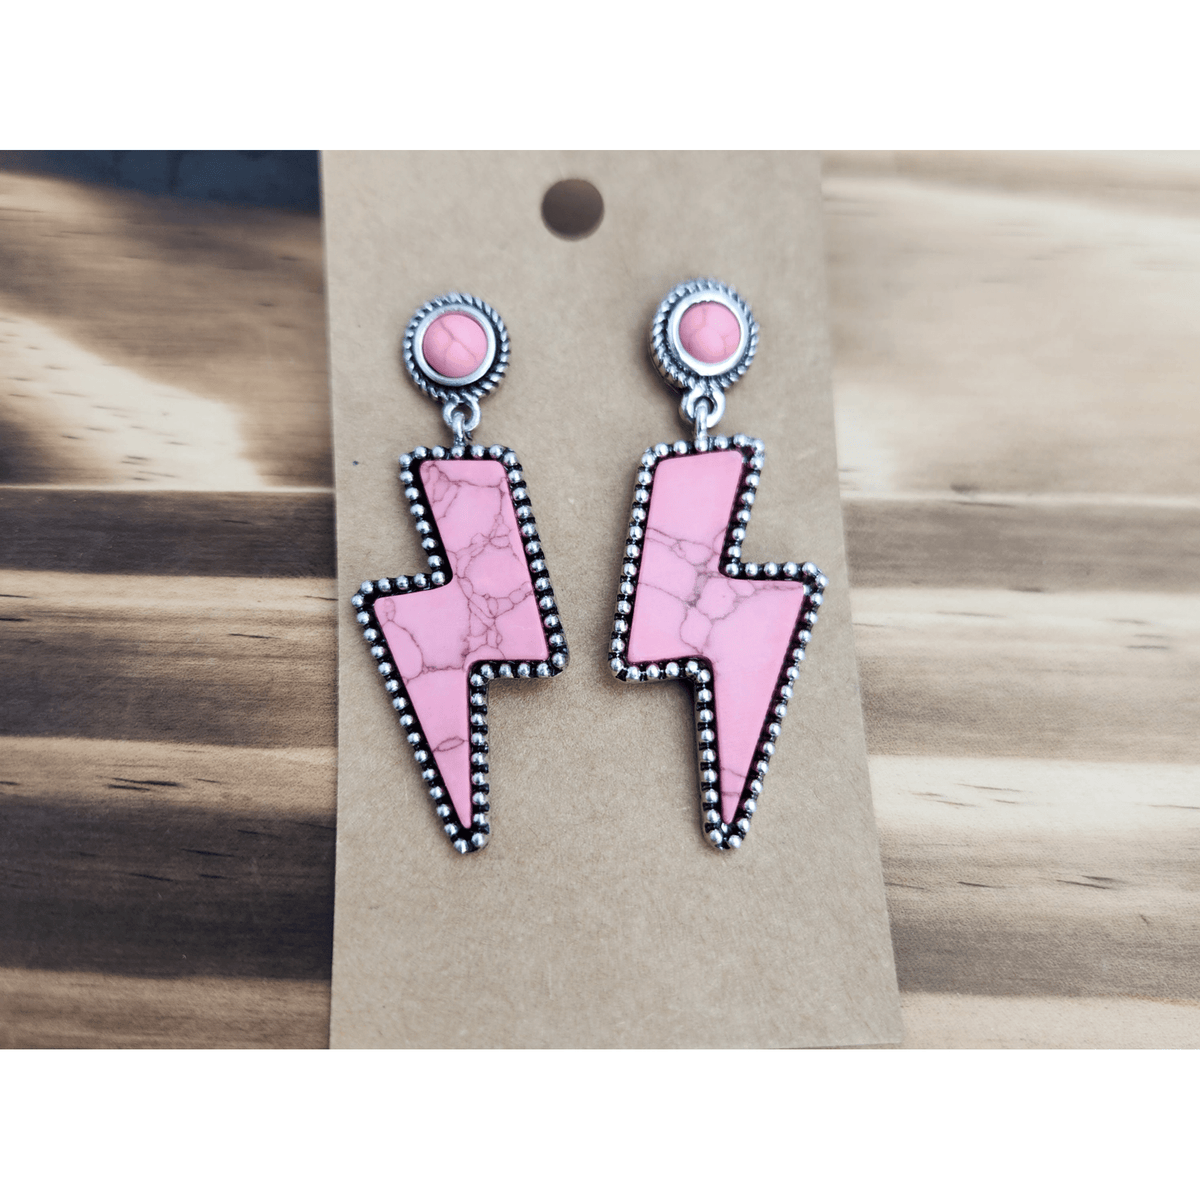 It's Electrifying Pink and Silver Lightning Bolt Earrings Earrings TheFringeCultureCollective